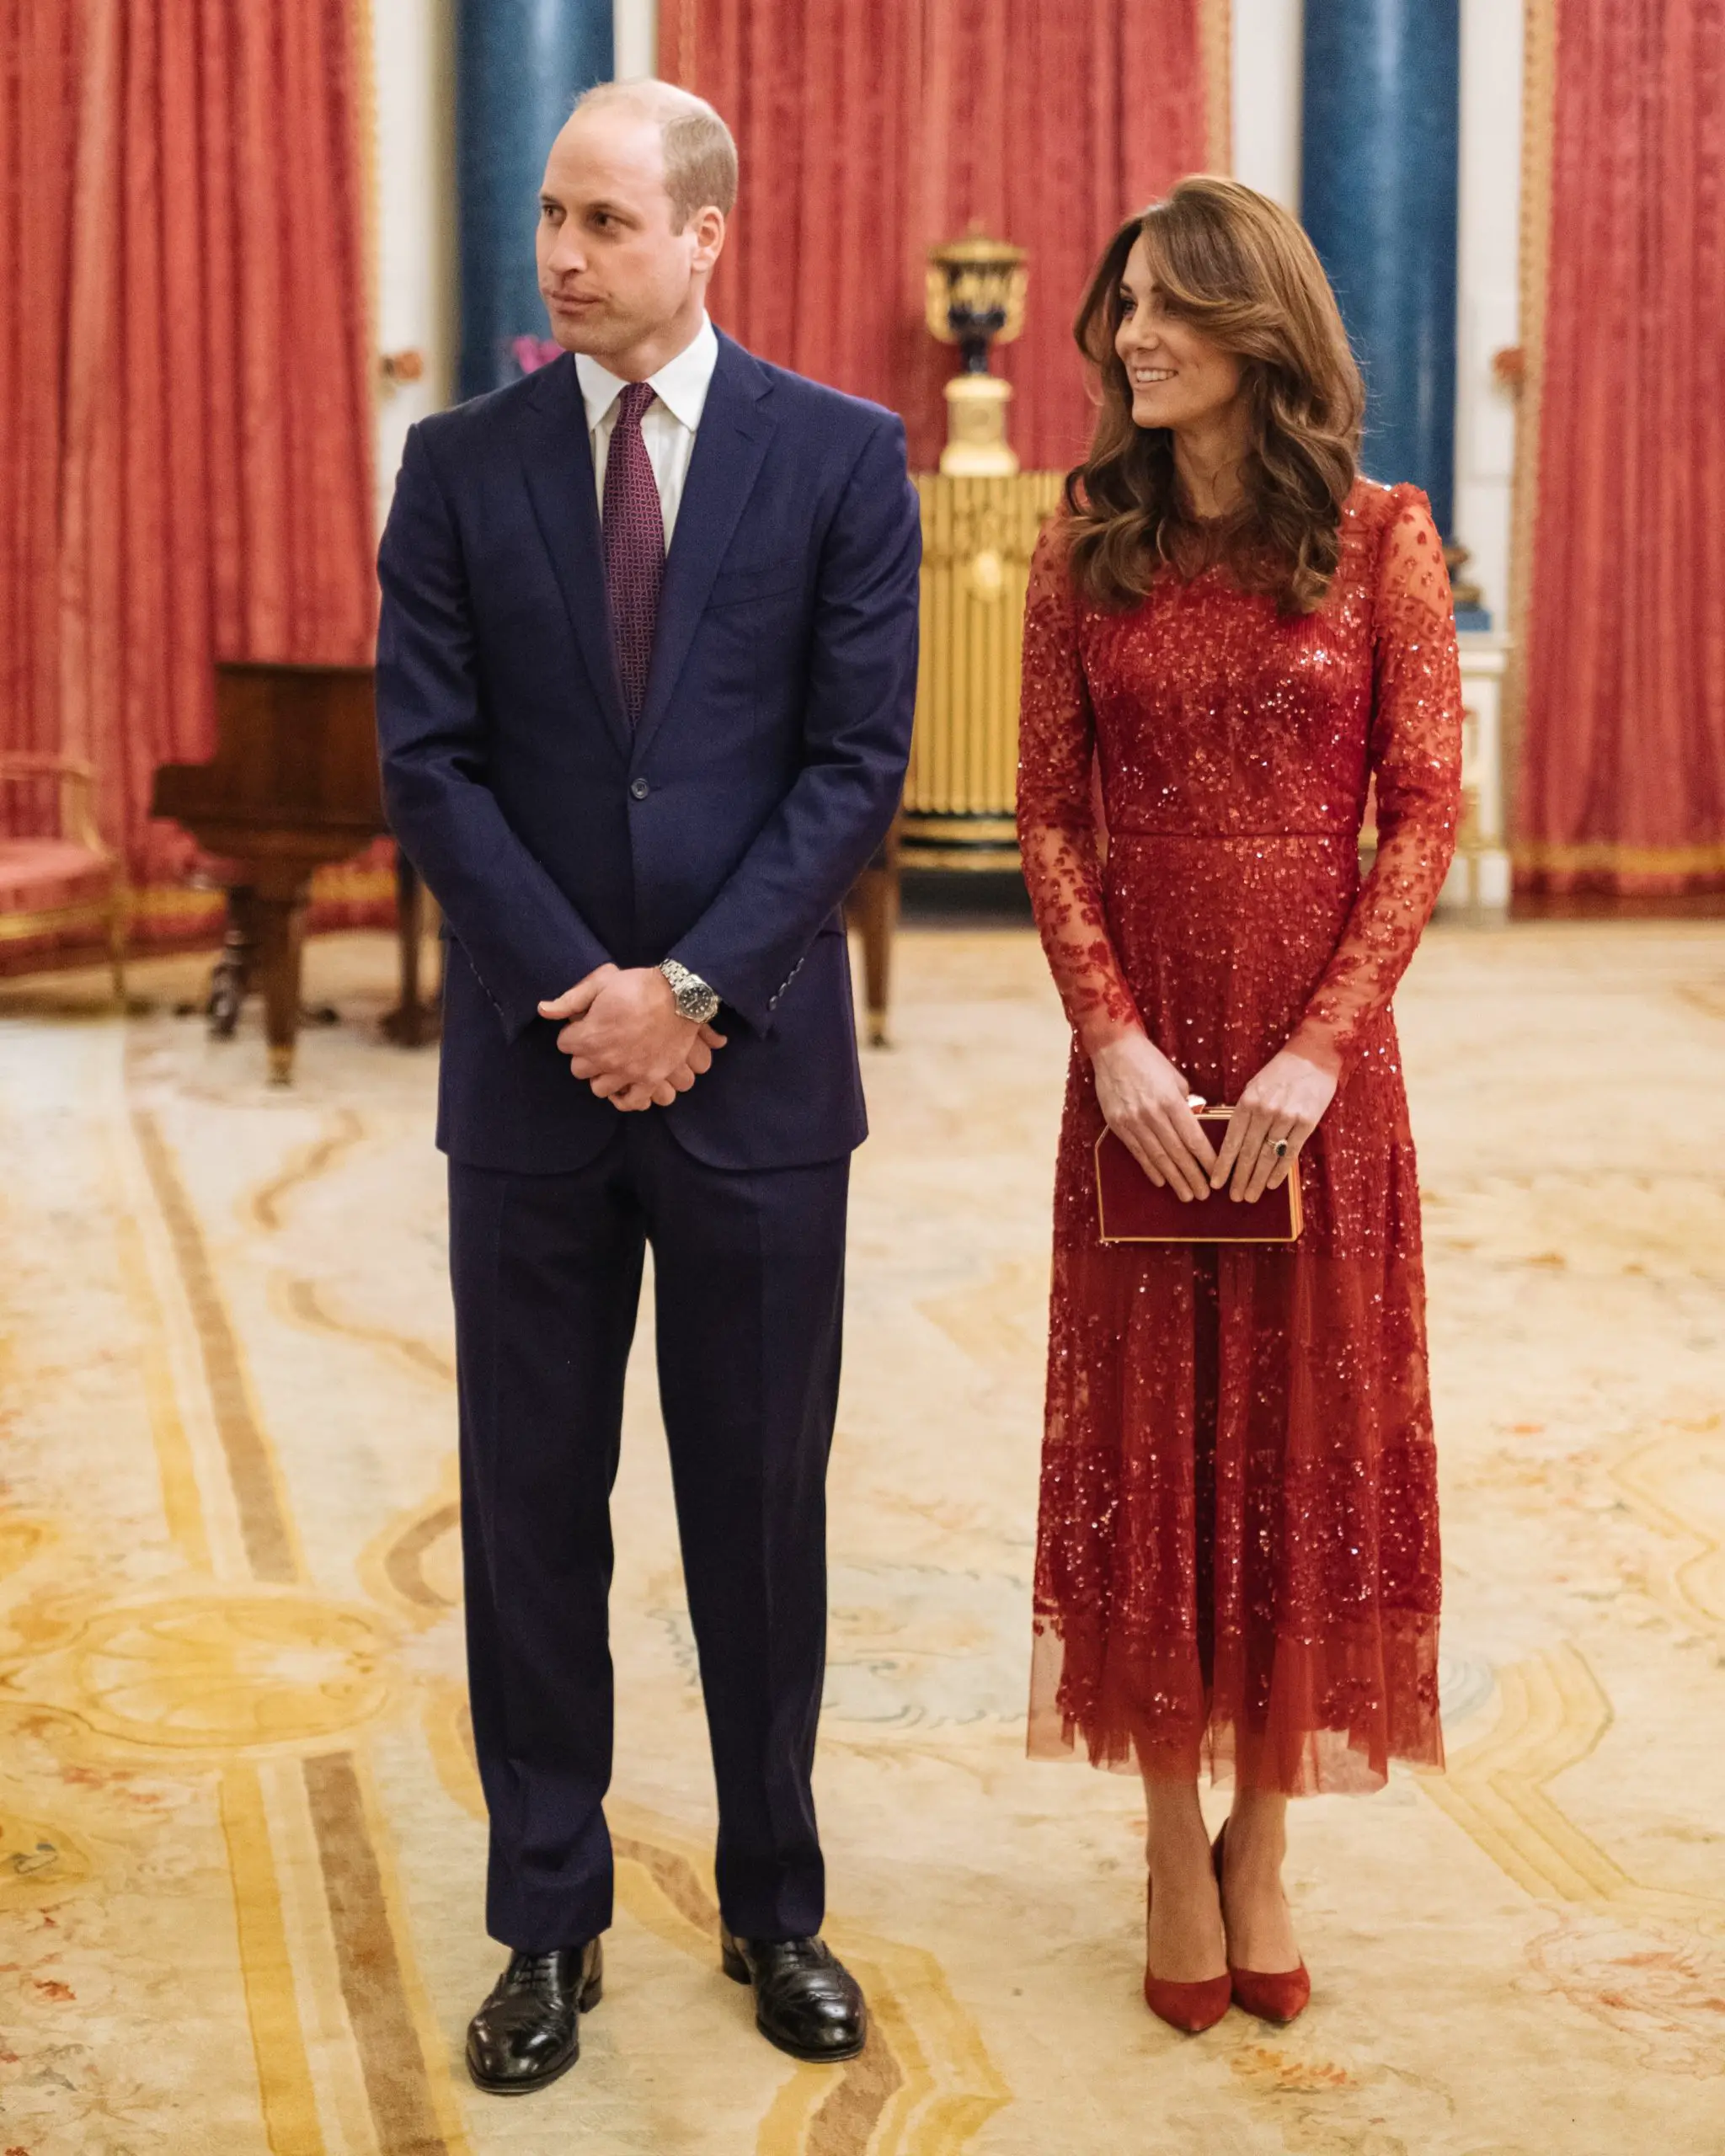 The Duke and Duchess of Cambridge hosted a reception at Buckingham Palace